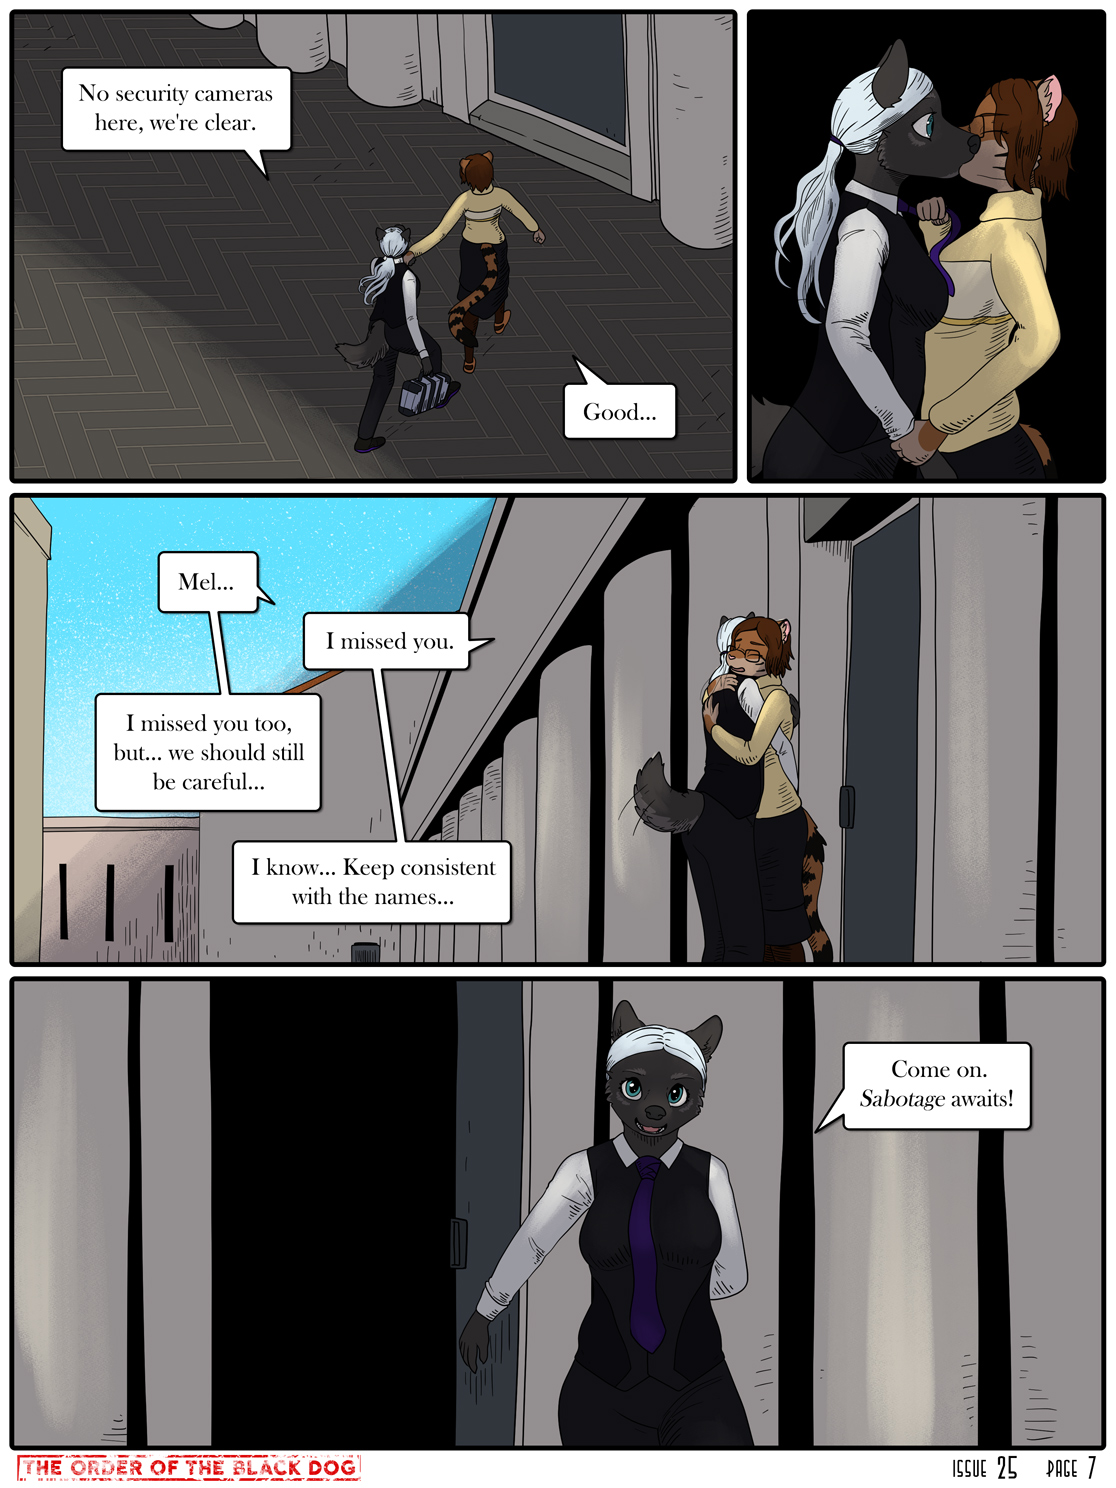 Issue 25, Page 7